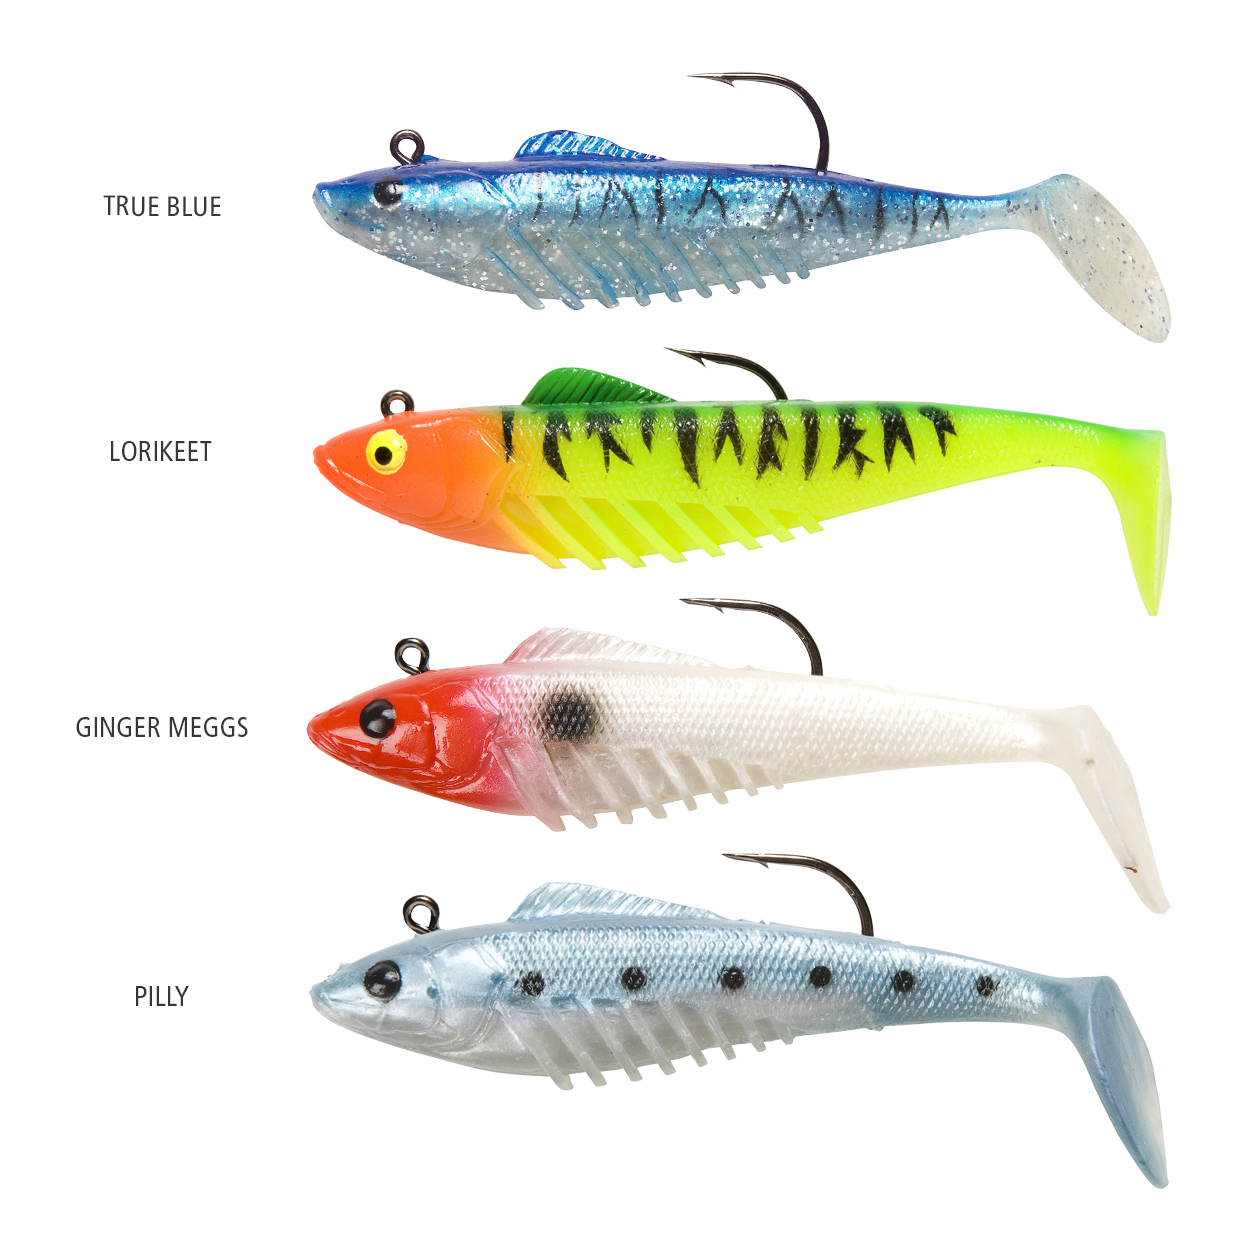 Squidgies Slickrig 65mm Pre Rigged Soft Plastic Fishing Lure #Rainbow Trout